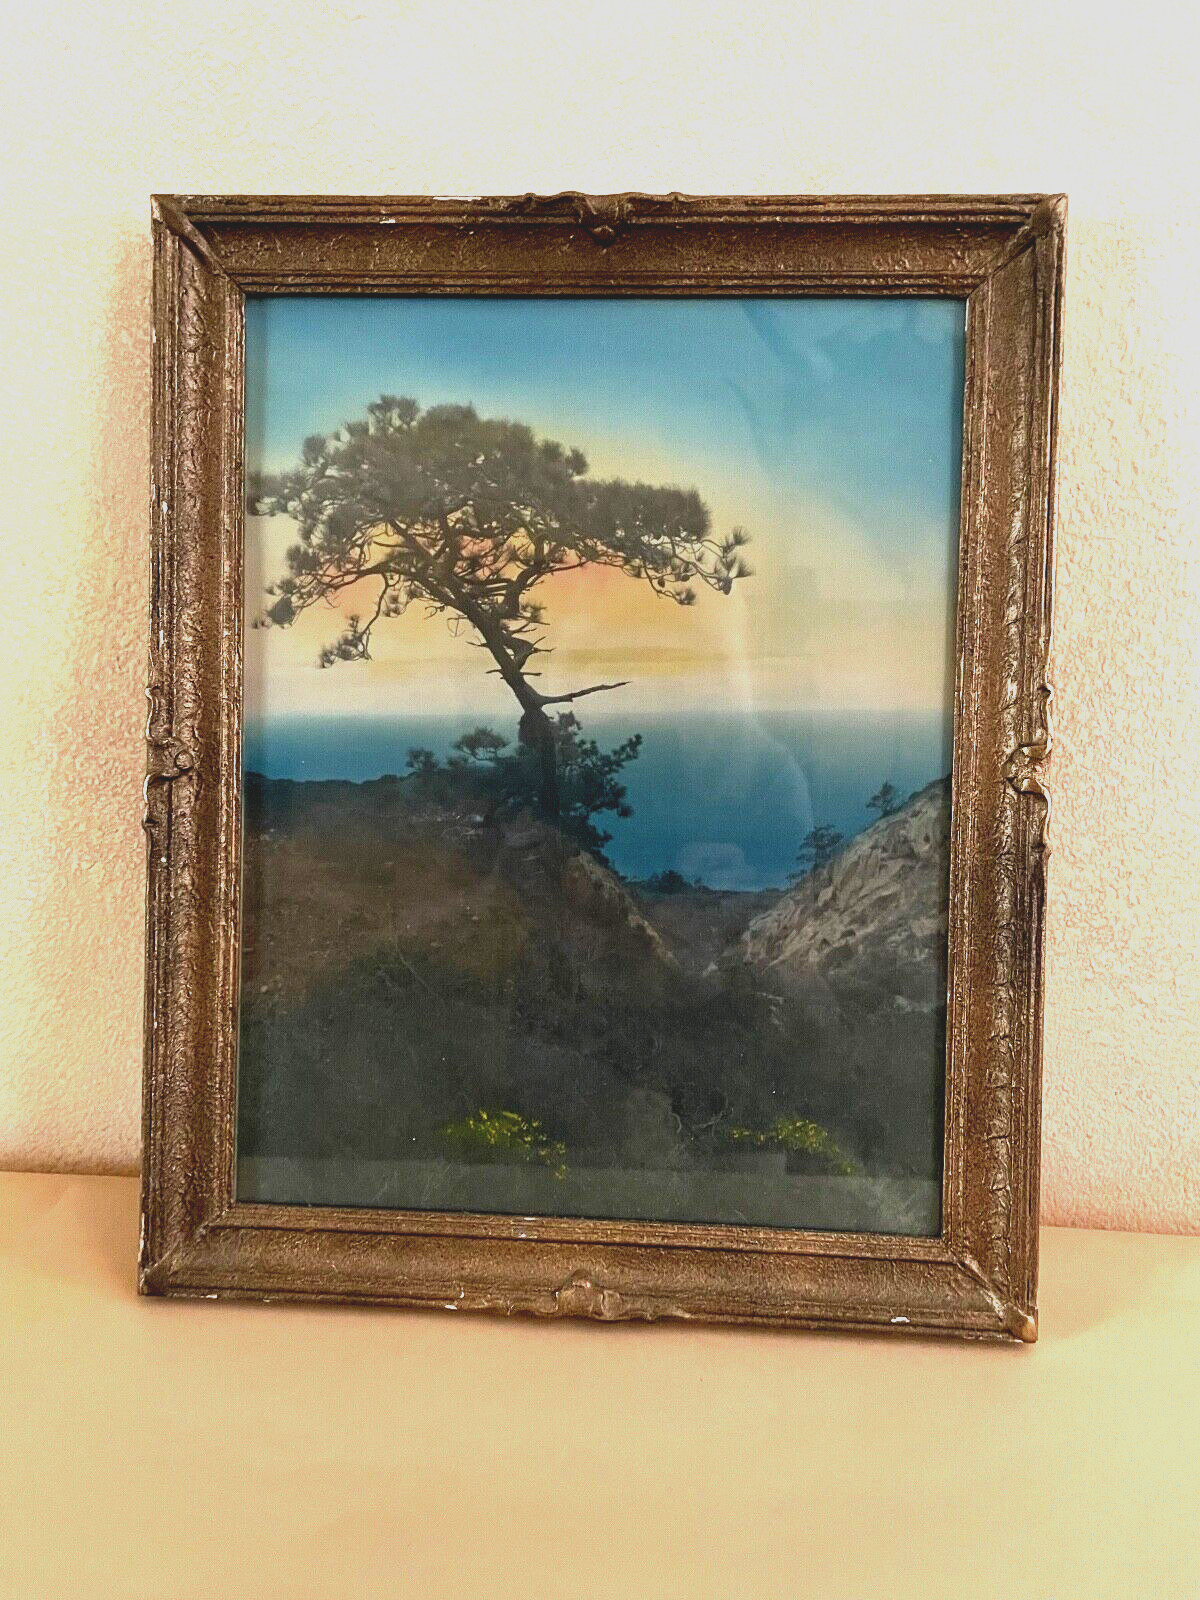 Antique Photograph Hand Tint Torrey Pine LaJolla CA Hand Carved Frame 13x16 1/4